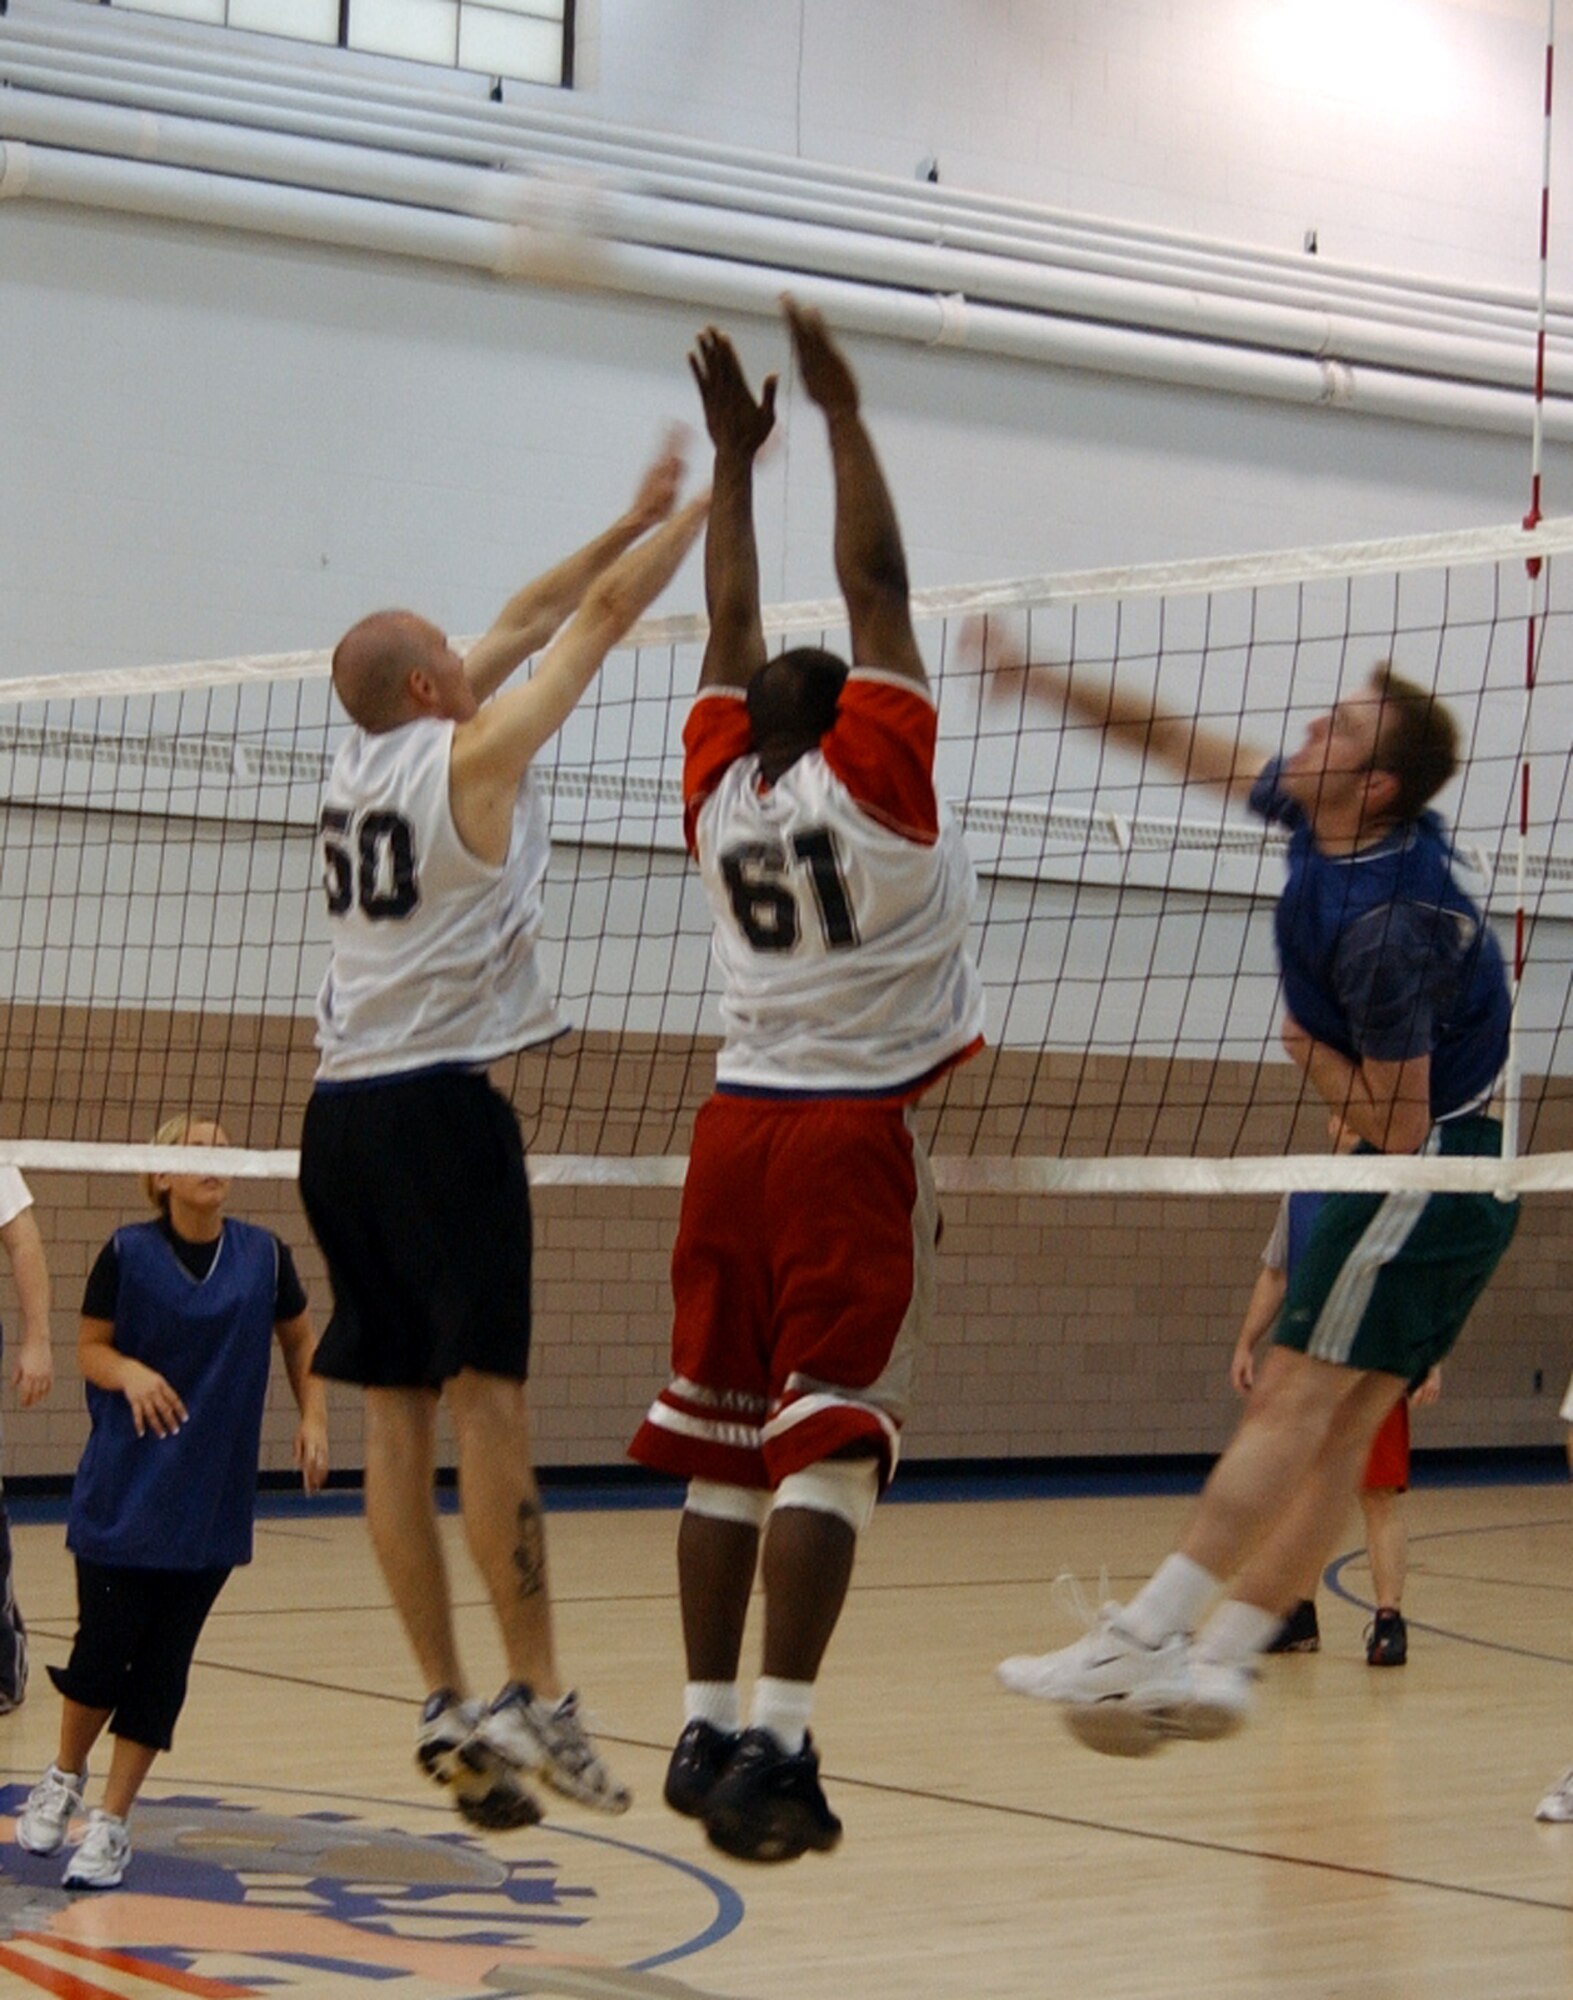 GRAND FORKS AIR FORCE BASE, N.D. ? Mission Support Squadron? Robert Mummert spikes the ball during the intramural volleyball championship April 30. MSS beat the 319th Logistics Readiness Squadron team A two games to one. (U.S. Air Force photo/Senior Airman J. Paul Croxon)